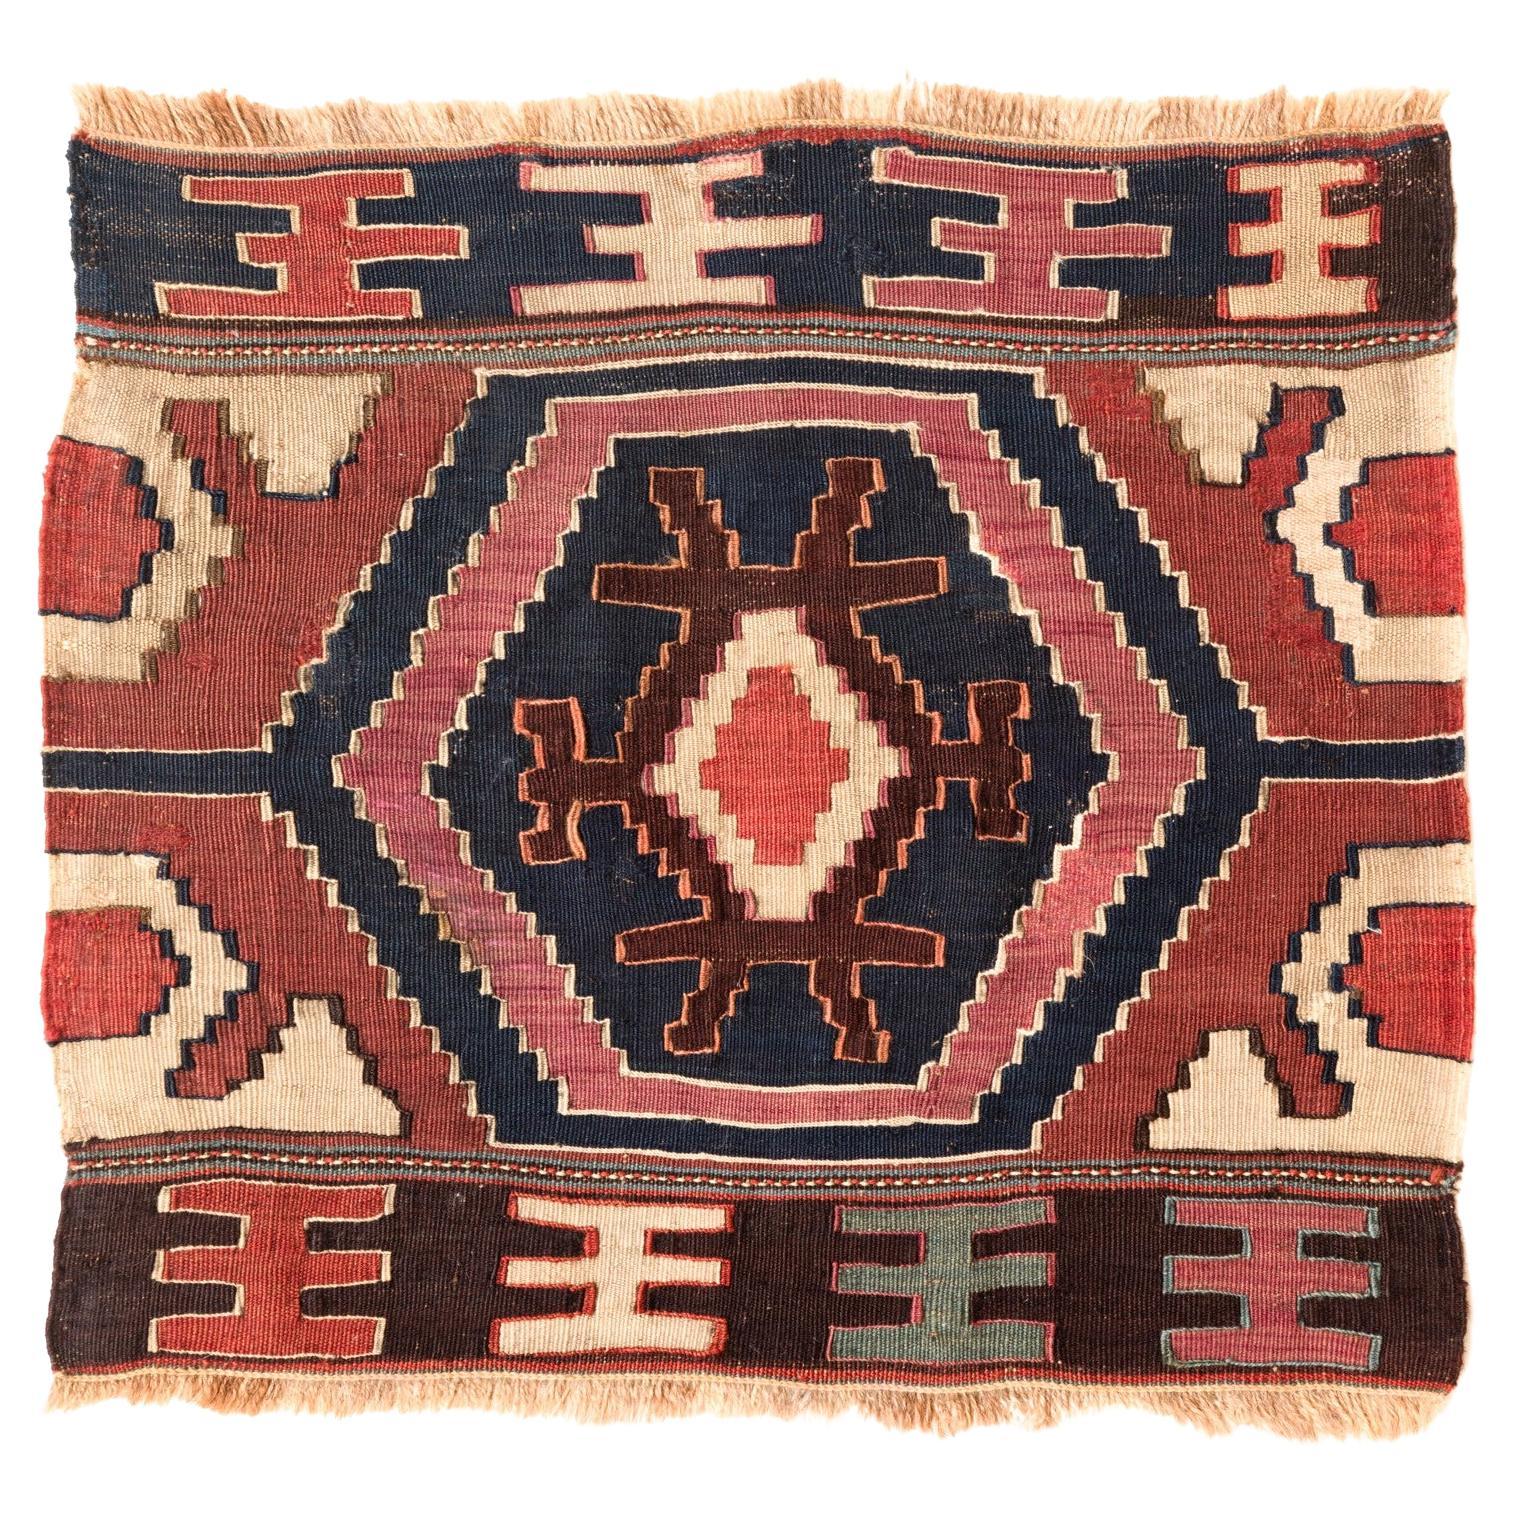 This is an antique collectible Early 20th century Kilim Woven Cradle Part from the Caucasus region with a rare and beautiful color composition.

Of the four countries that make up the Caucasus, Azerbaijan produces the most kilims, and the land has